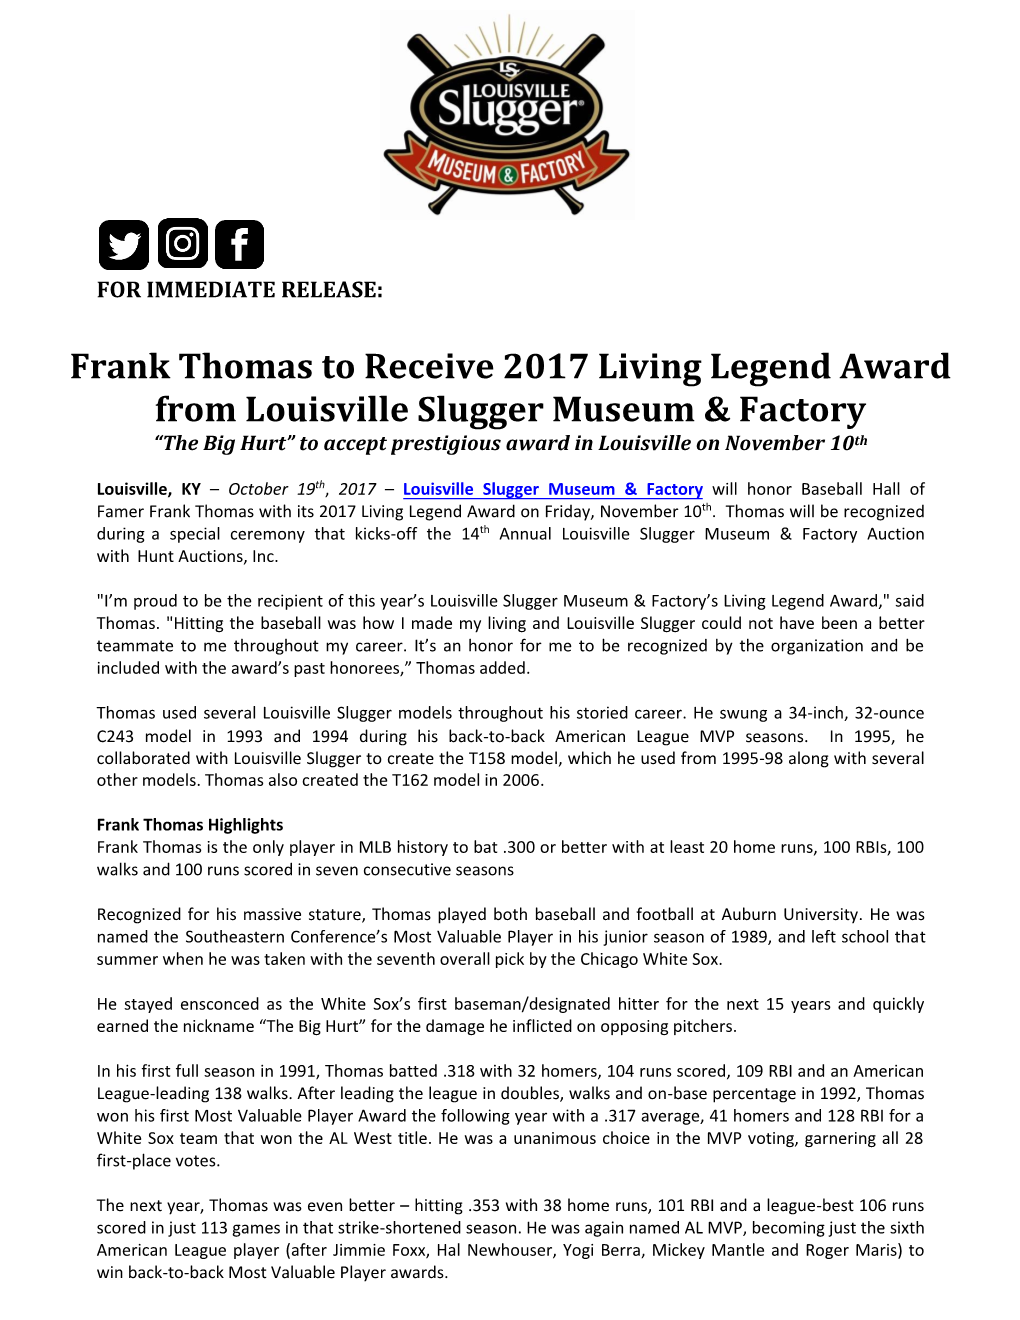 Frank Thomas to Receive 2017 Living Legend Award from Louisville Slugger Museum & Factory